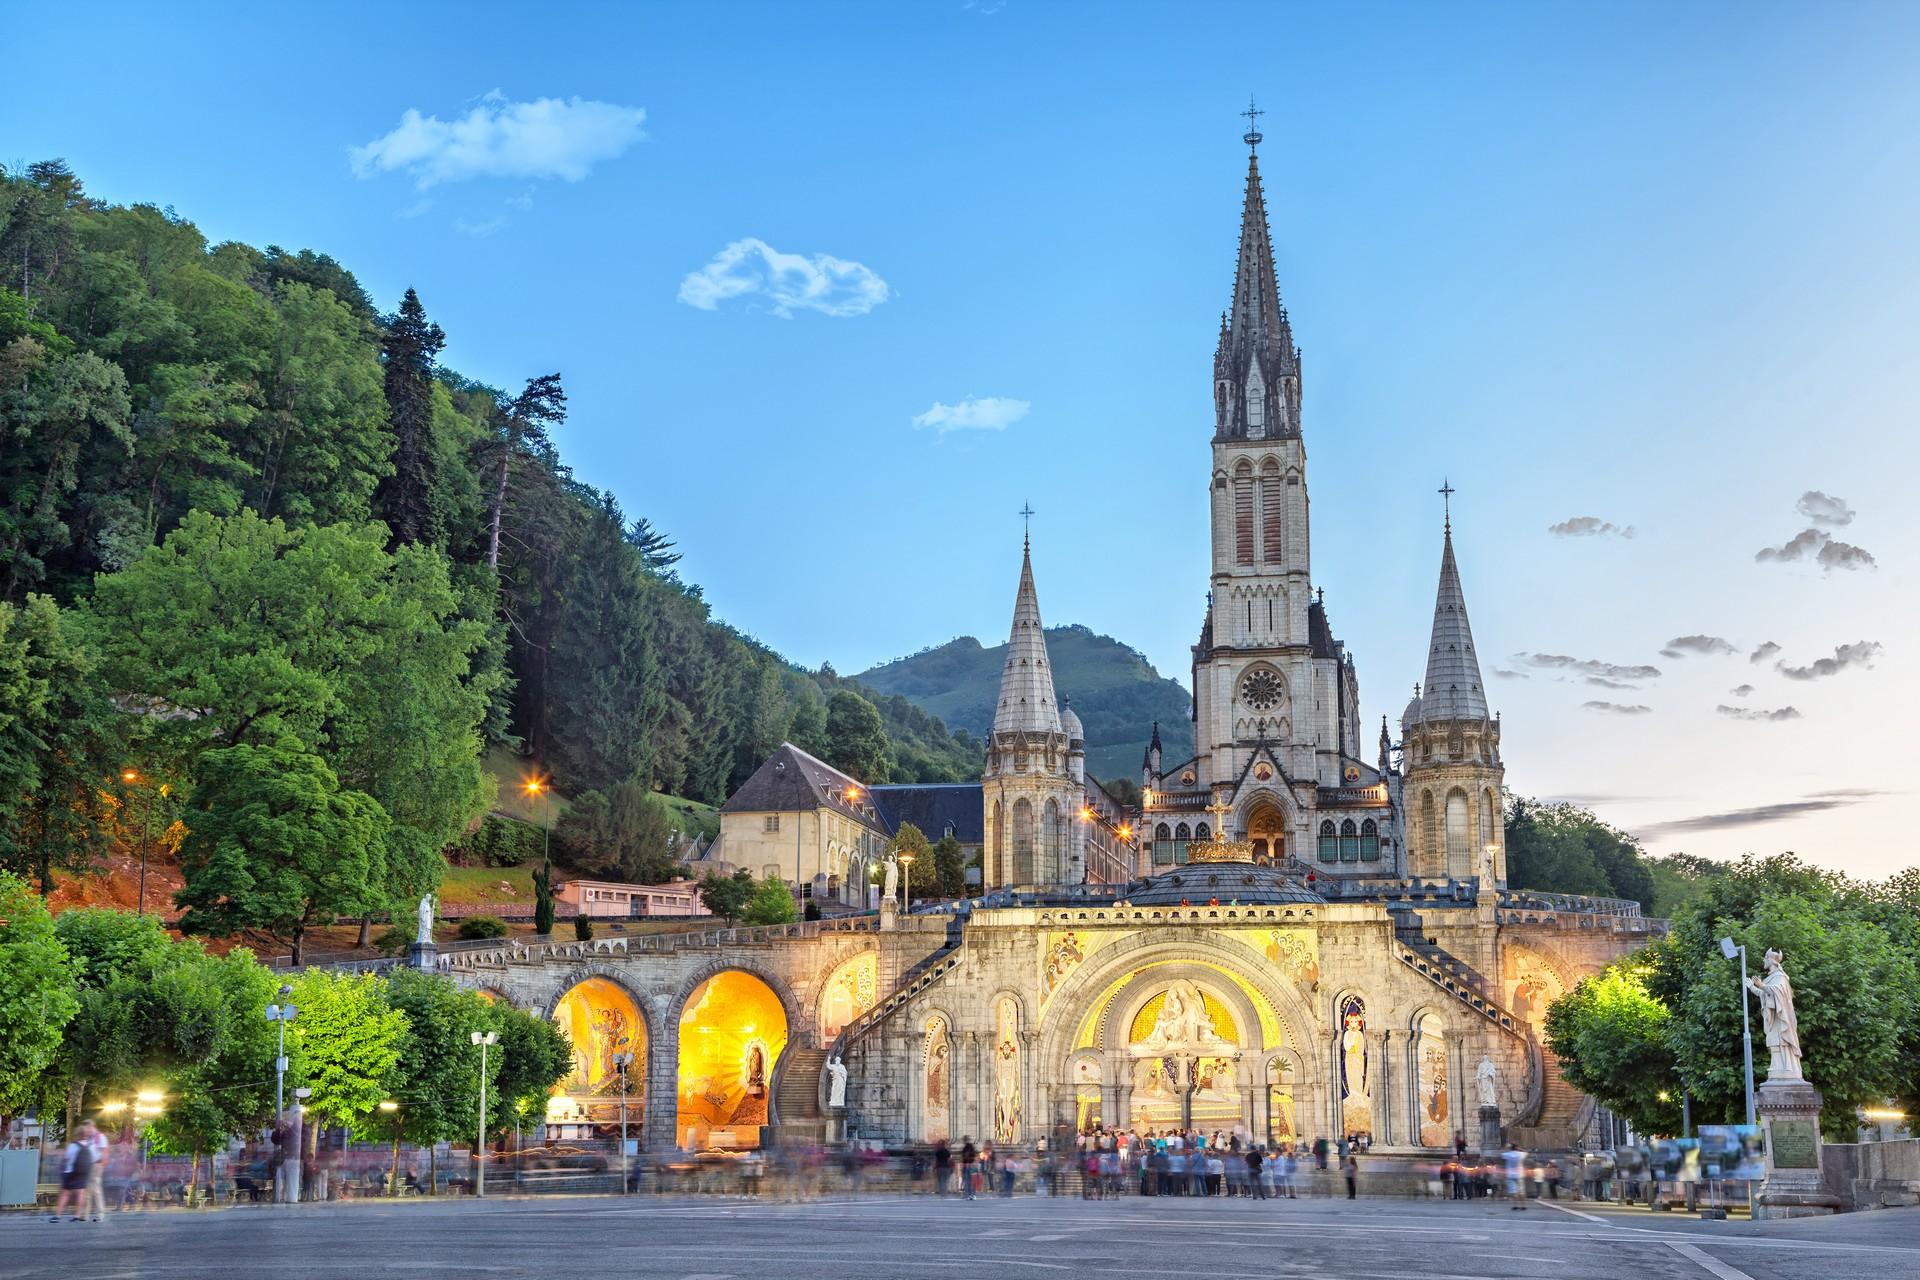 City square in Lourdes in sunny weather with few clouds